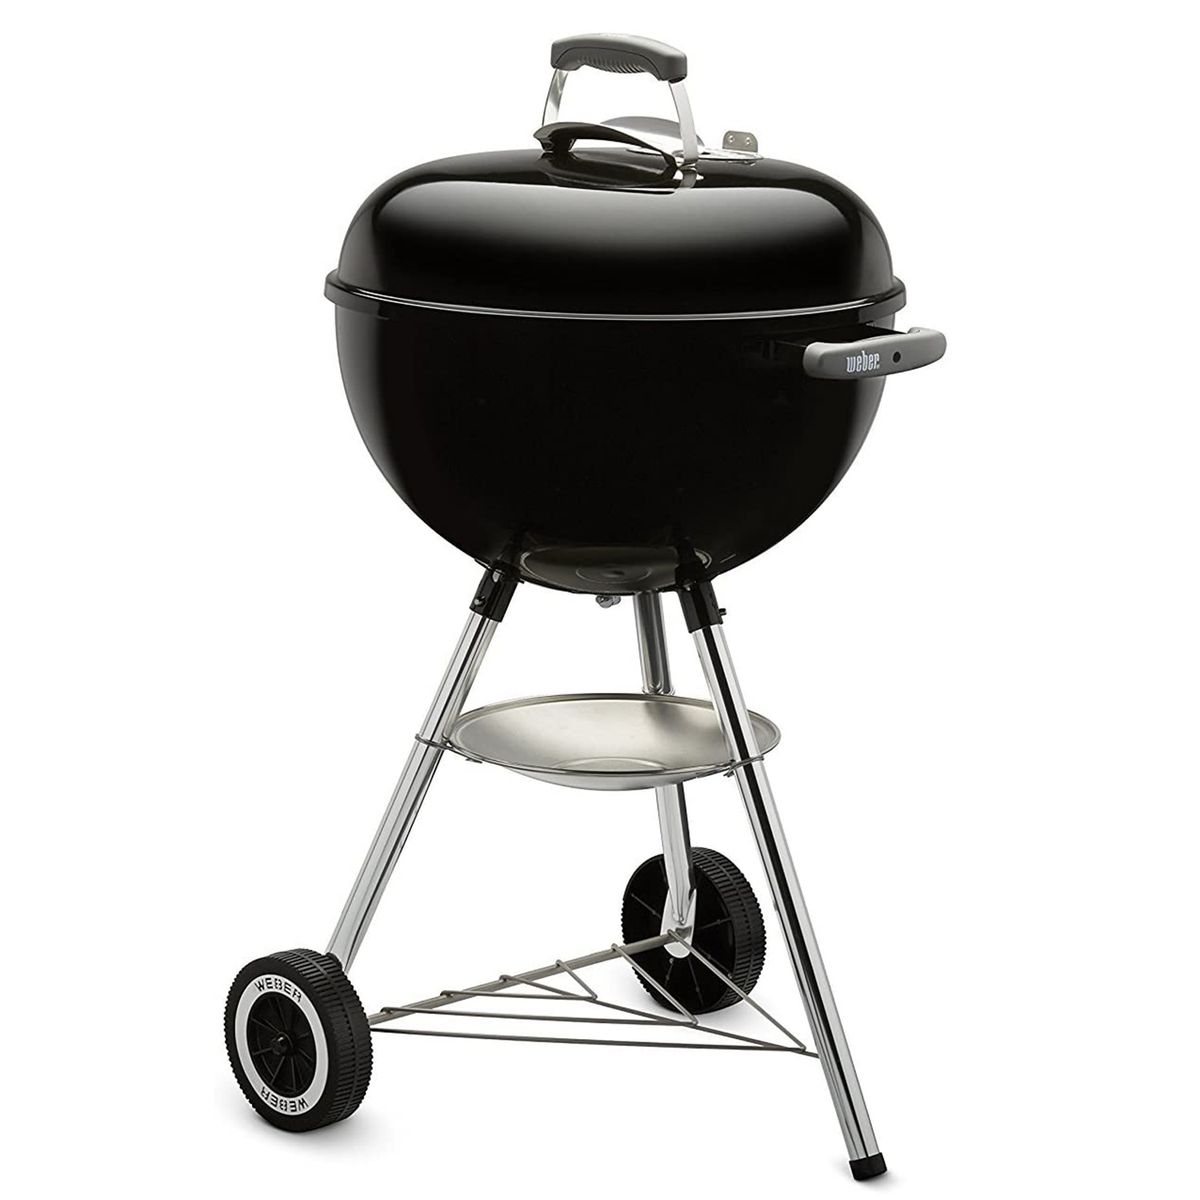 Memorial Day grill sales